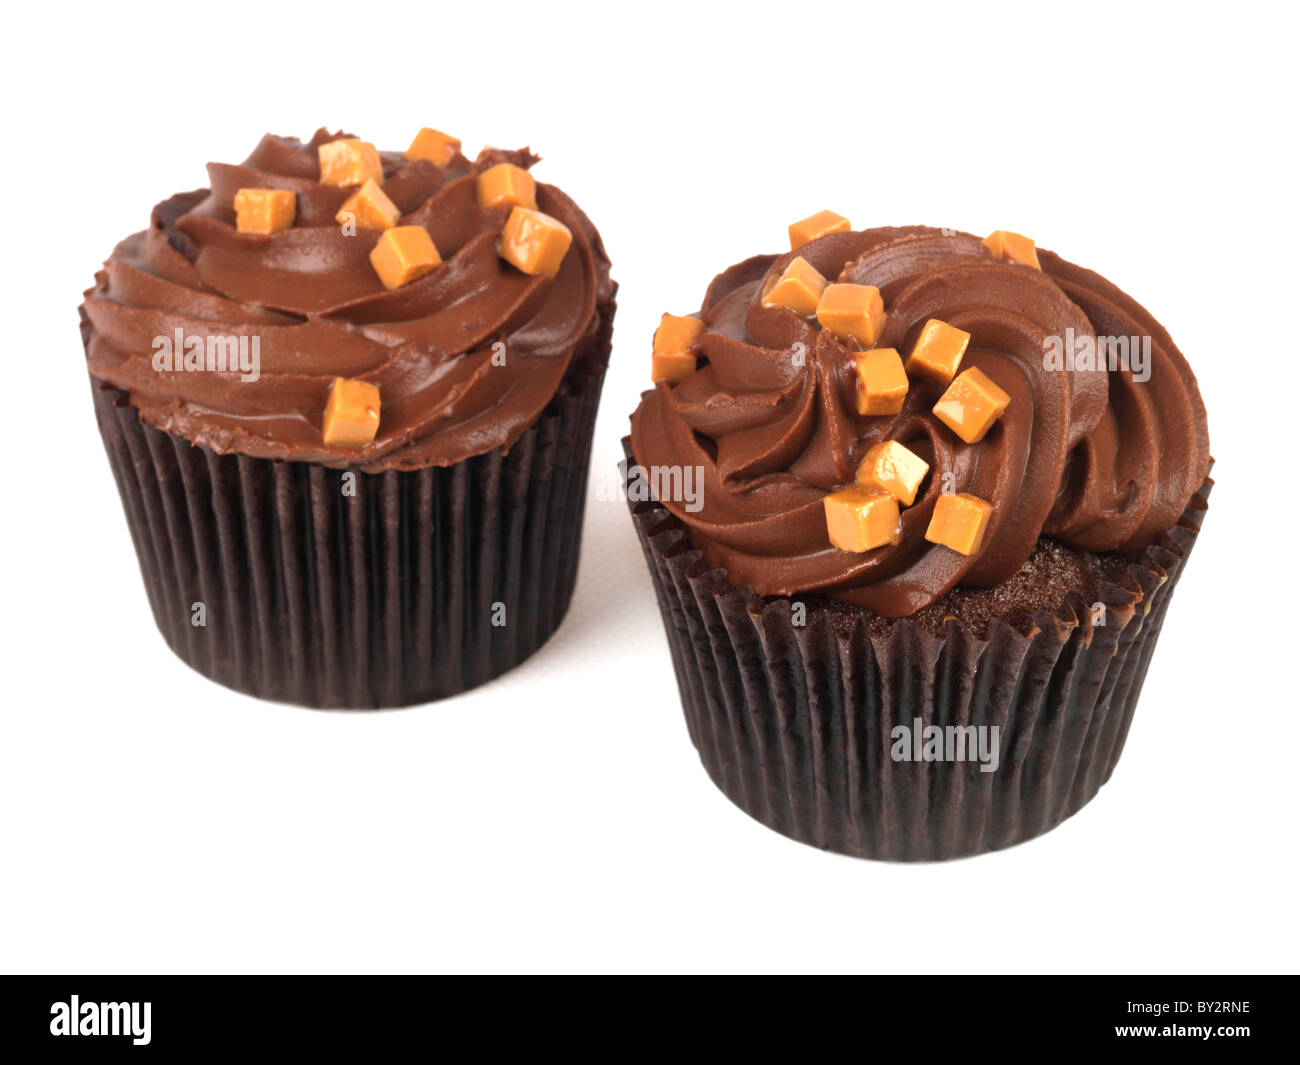 Tasty Authentic Chocolate Cup Cakes With Caramel Chunks And Fondant Icing Desserts Against A White Background With A Clipping Path And No People Stock Photo